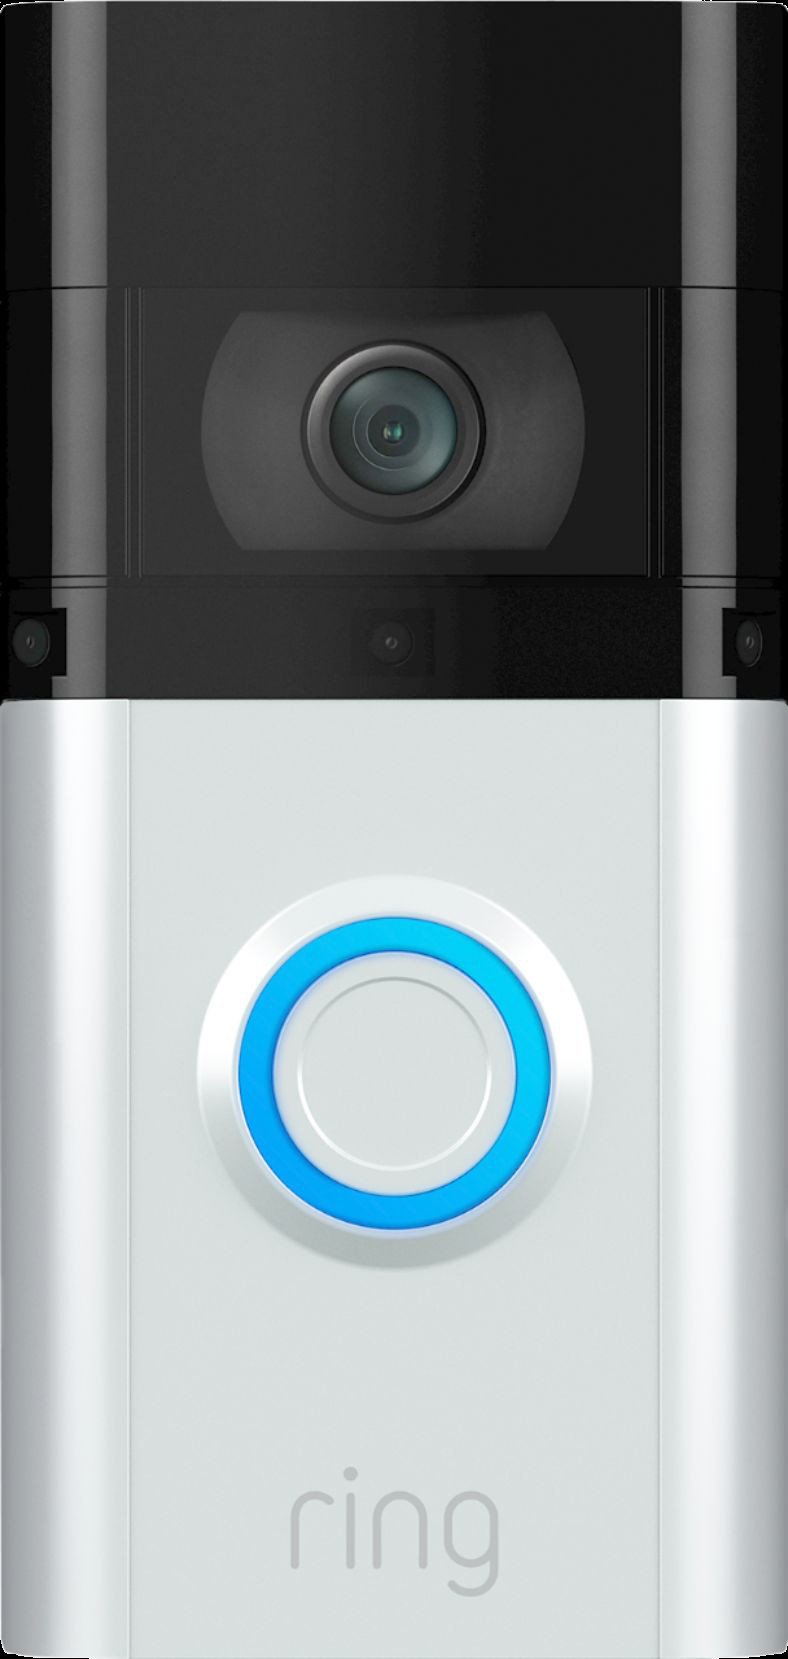 do you have to have wifi for the ring doorbell